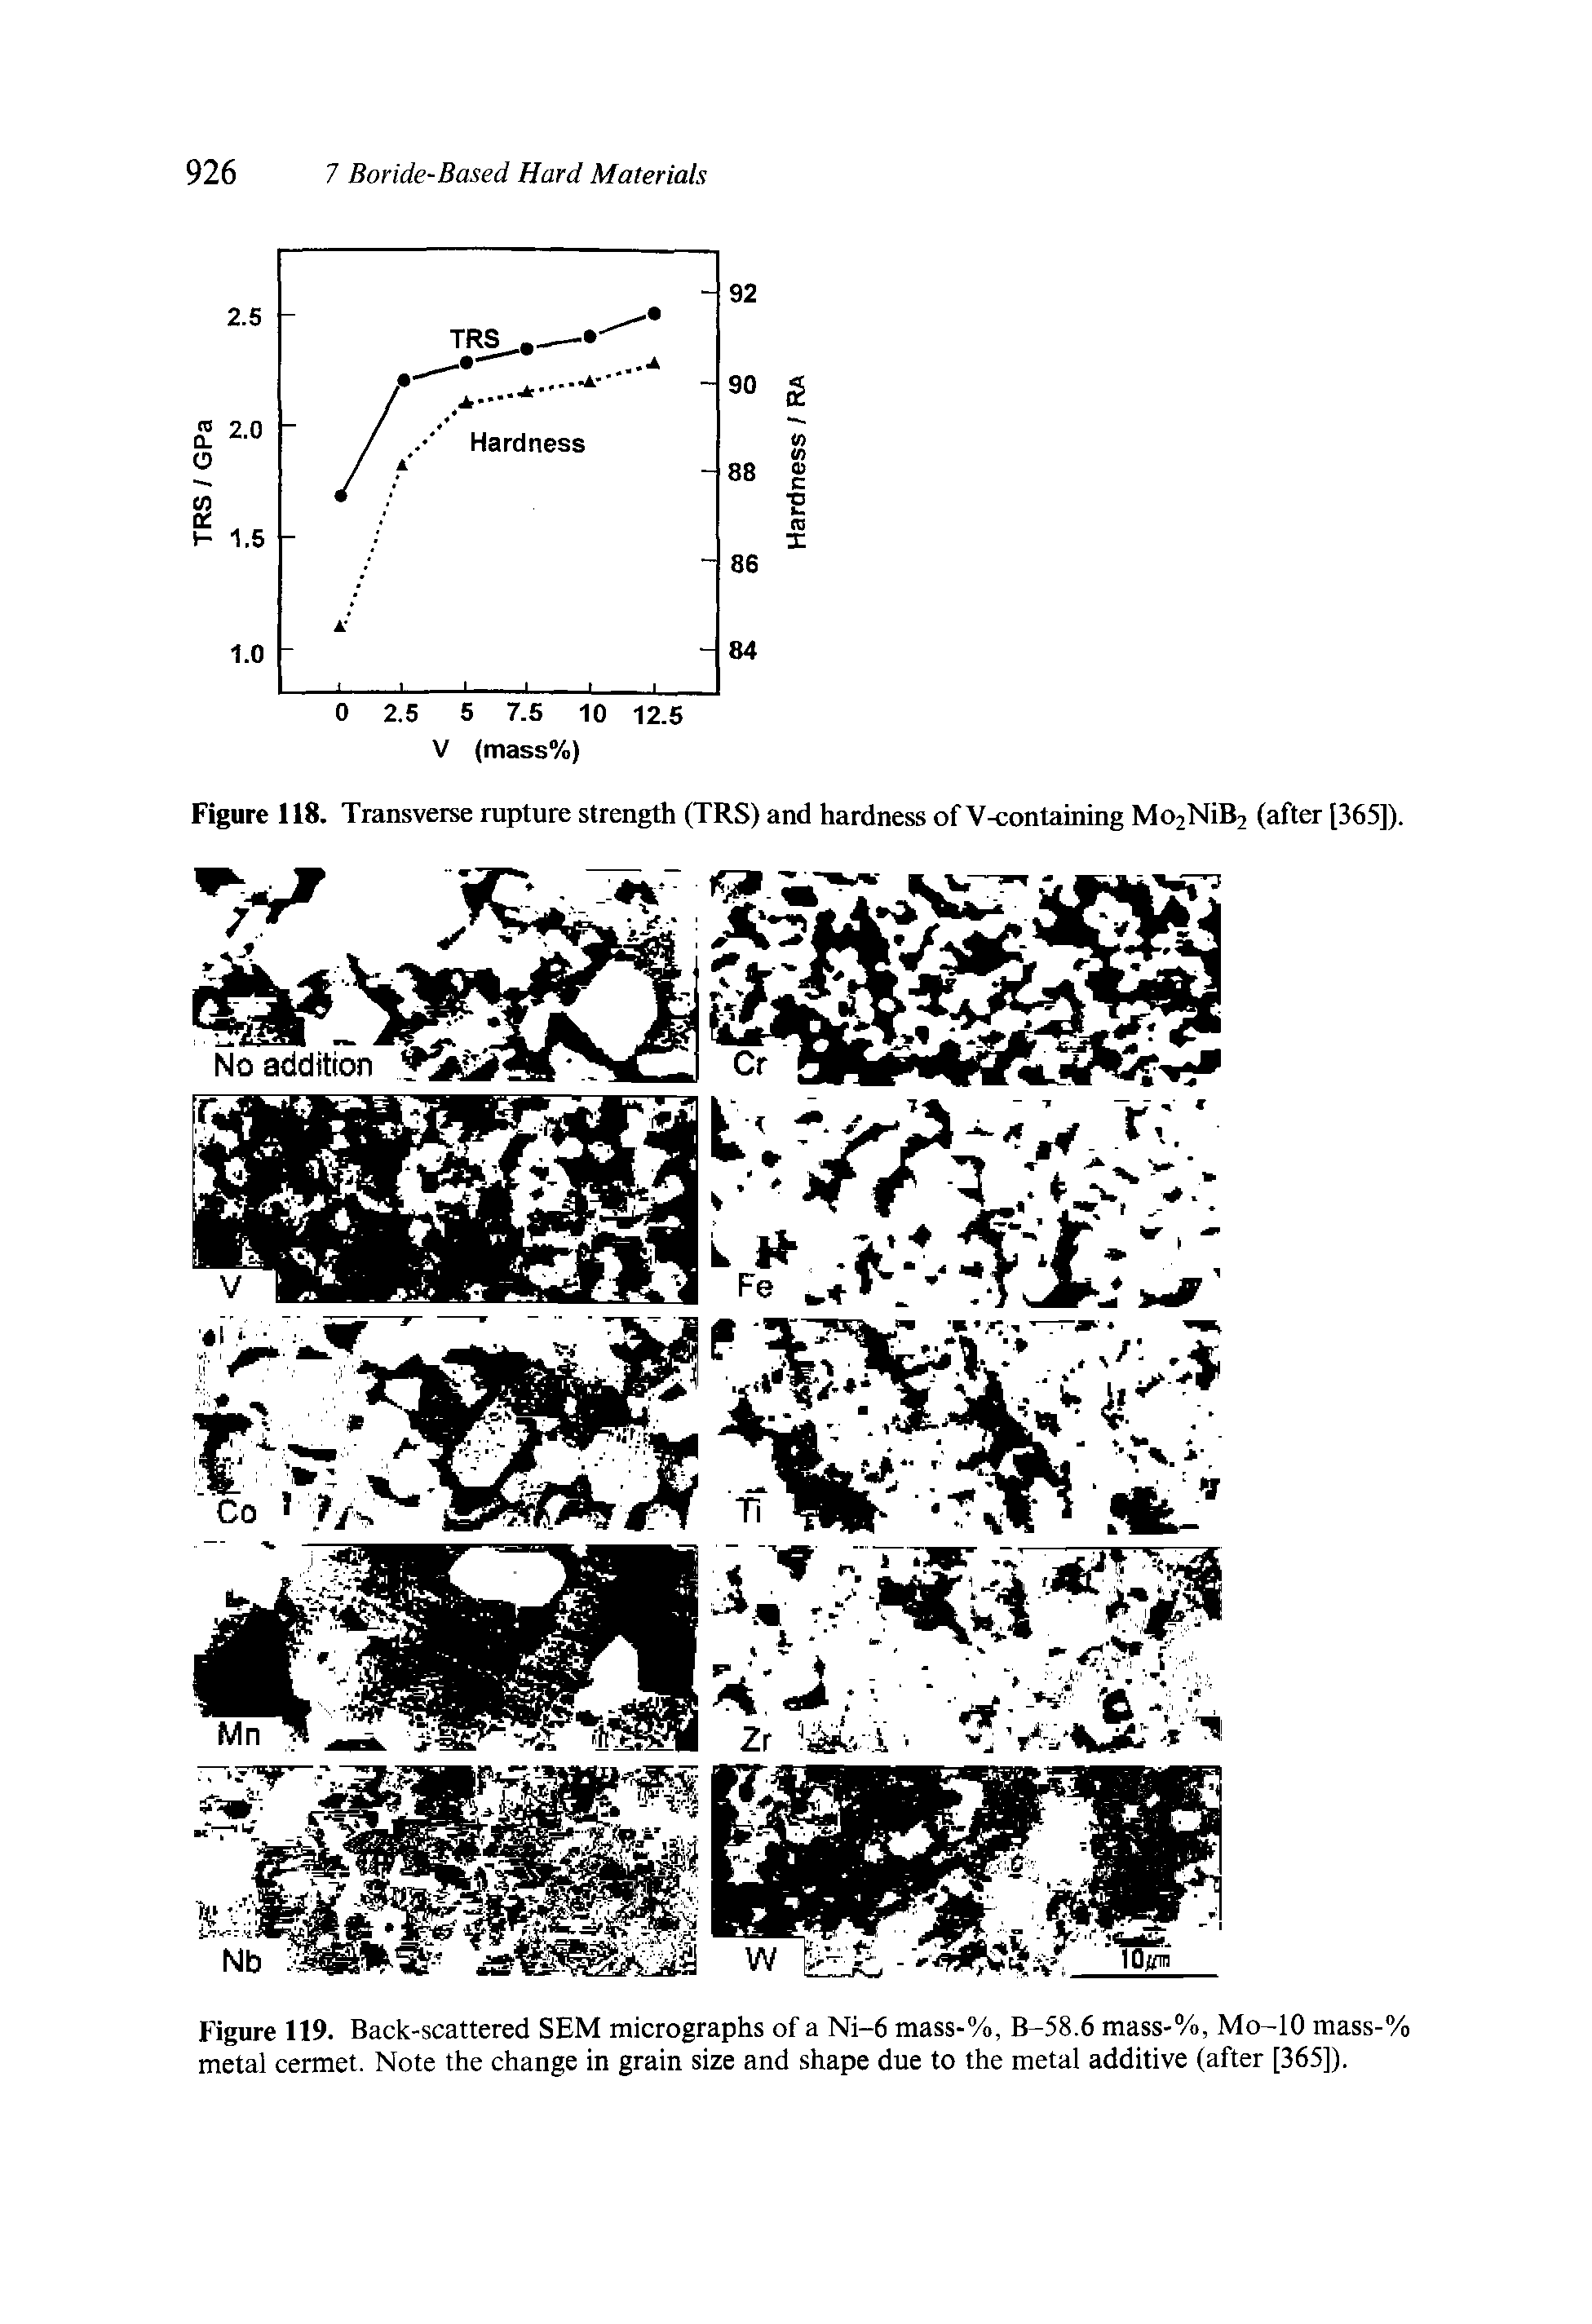 Figure 118. Transverse rupture strength (TRS) and hardness of V-containing Mo2NiB2 (after [365]).